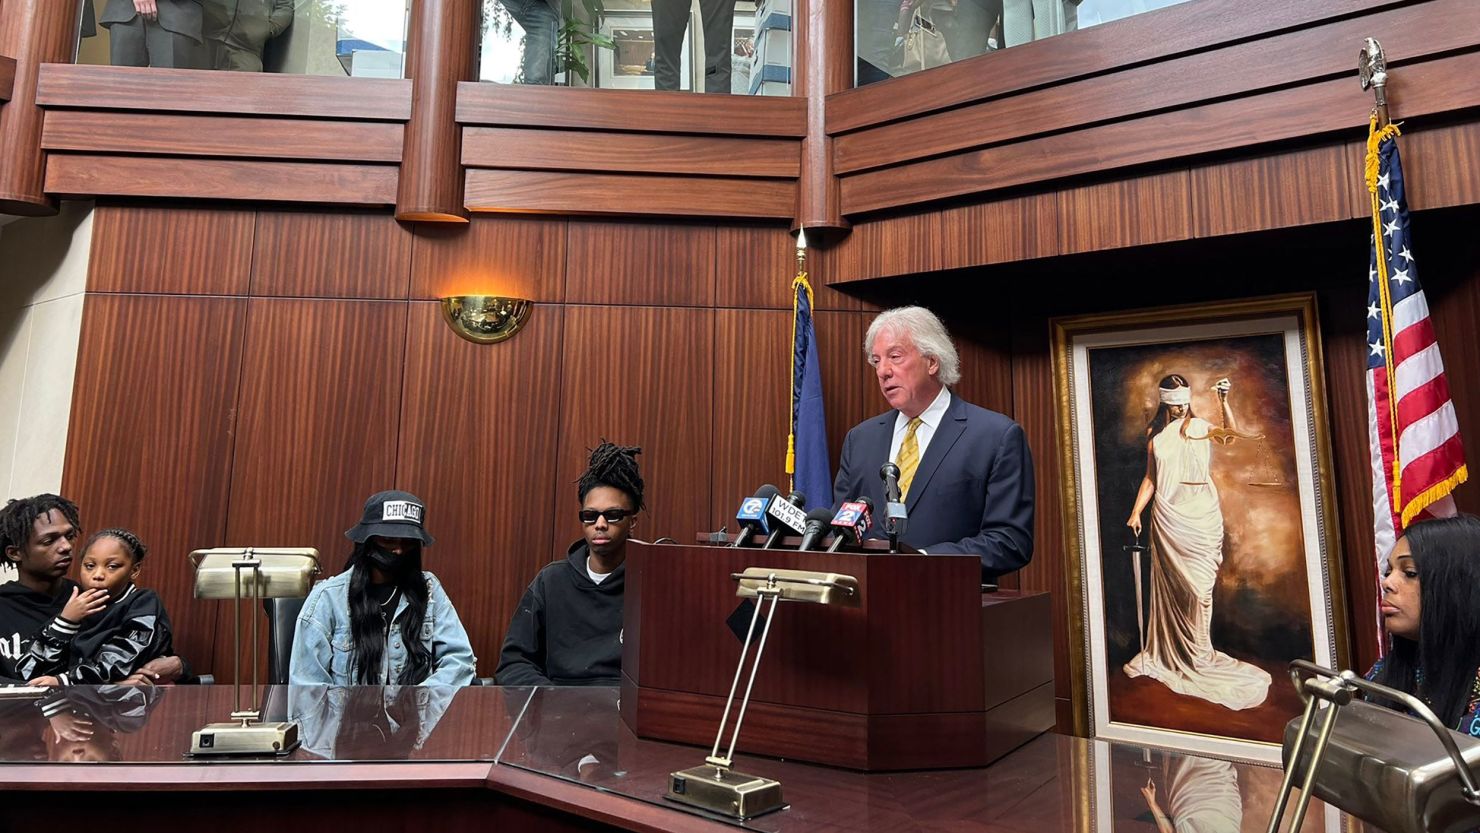 Attorney Geoffrey Fieger addresses the death of Porter Burks, the Detroit man killed by police during a mental health crisis.